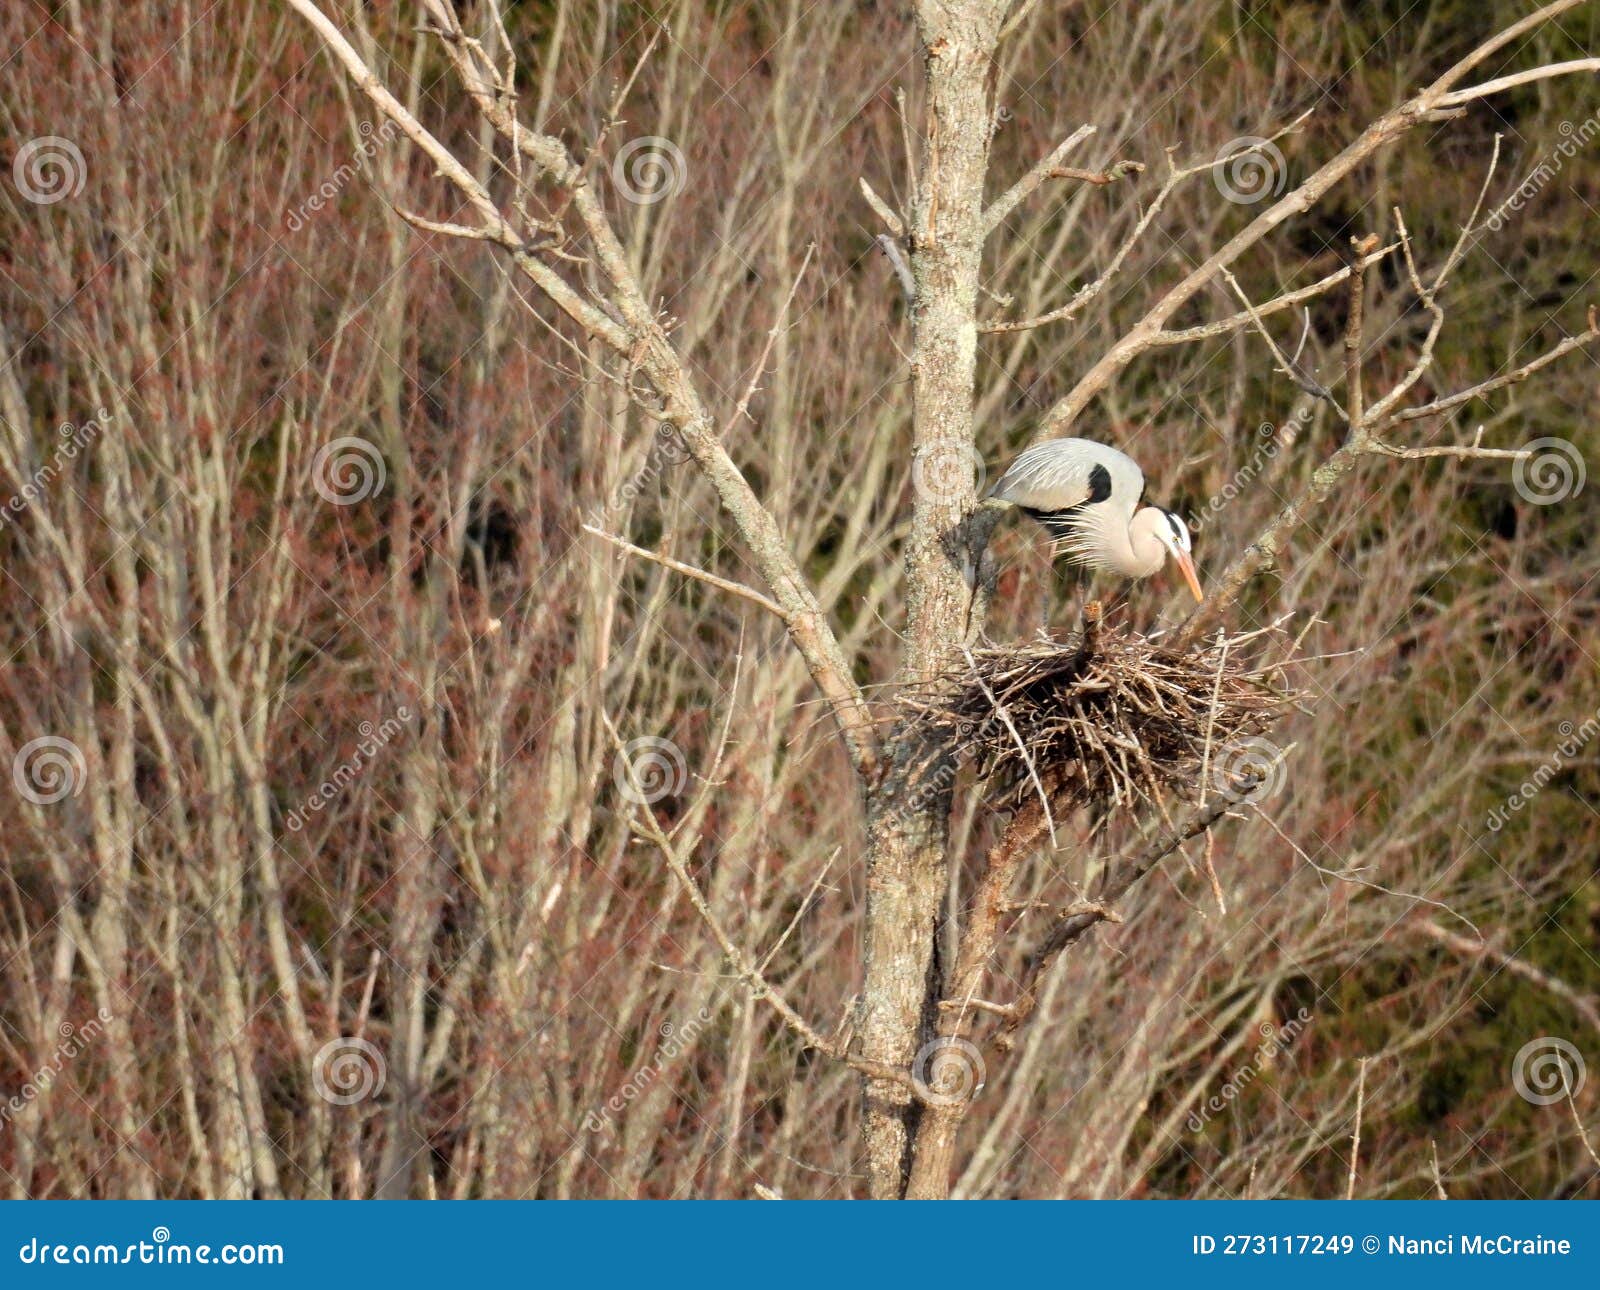 great blue heron standing on nest in springtime